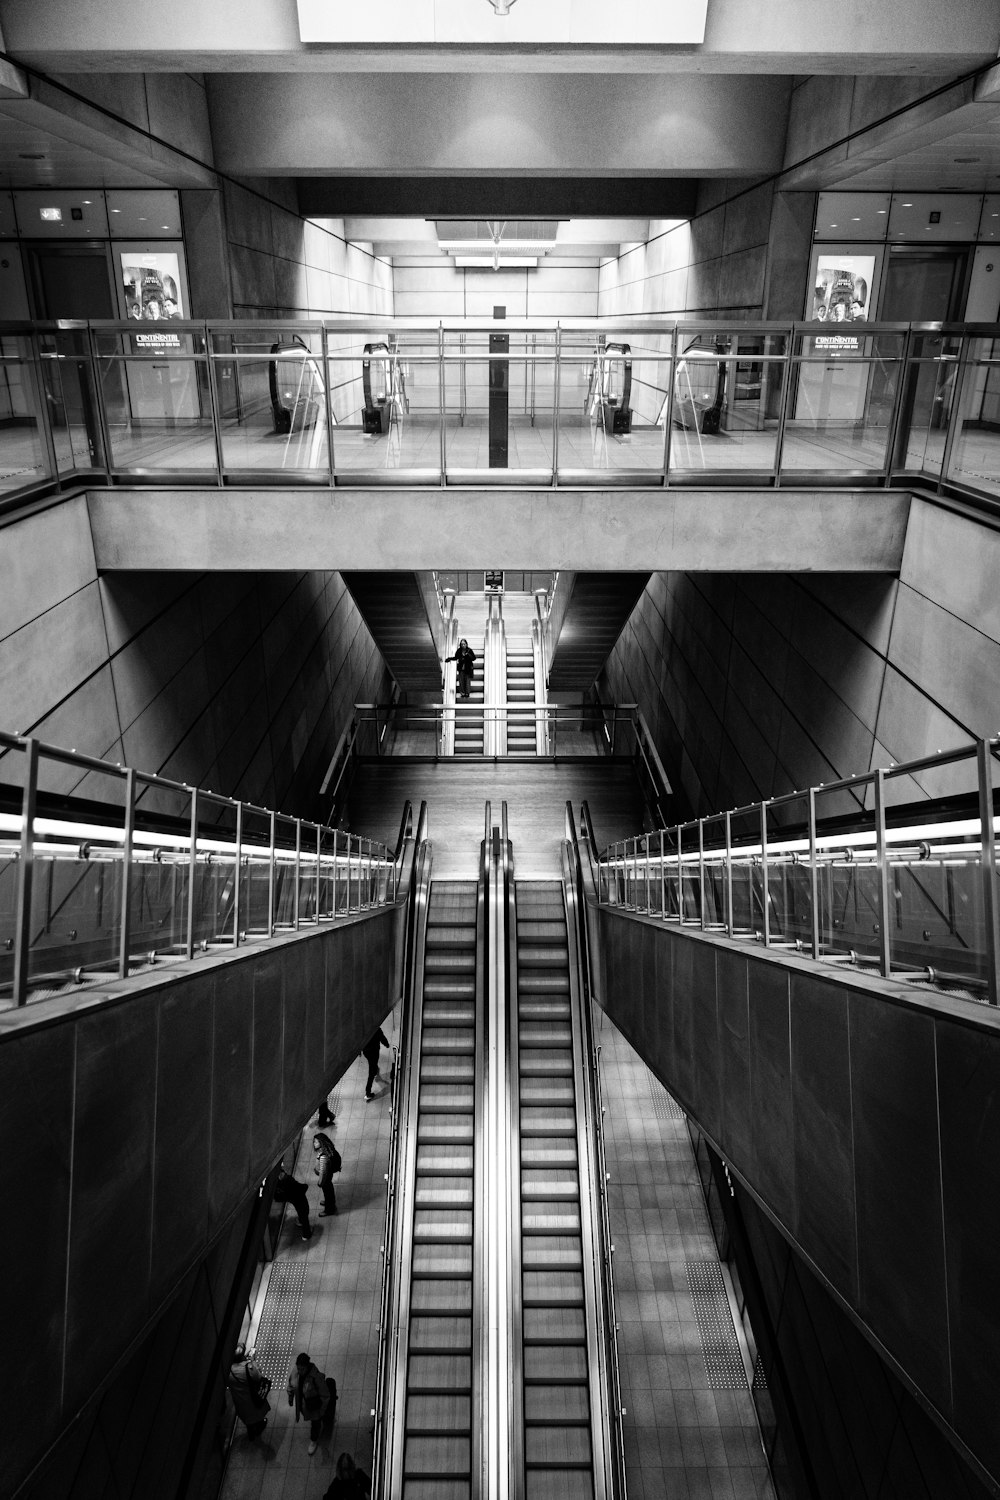 a black and white photo of escalators in a building